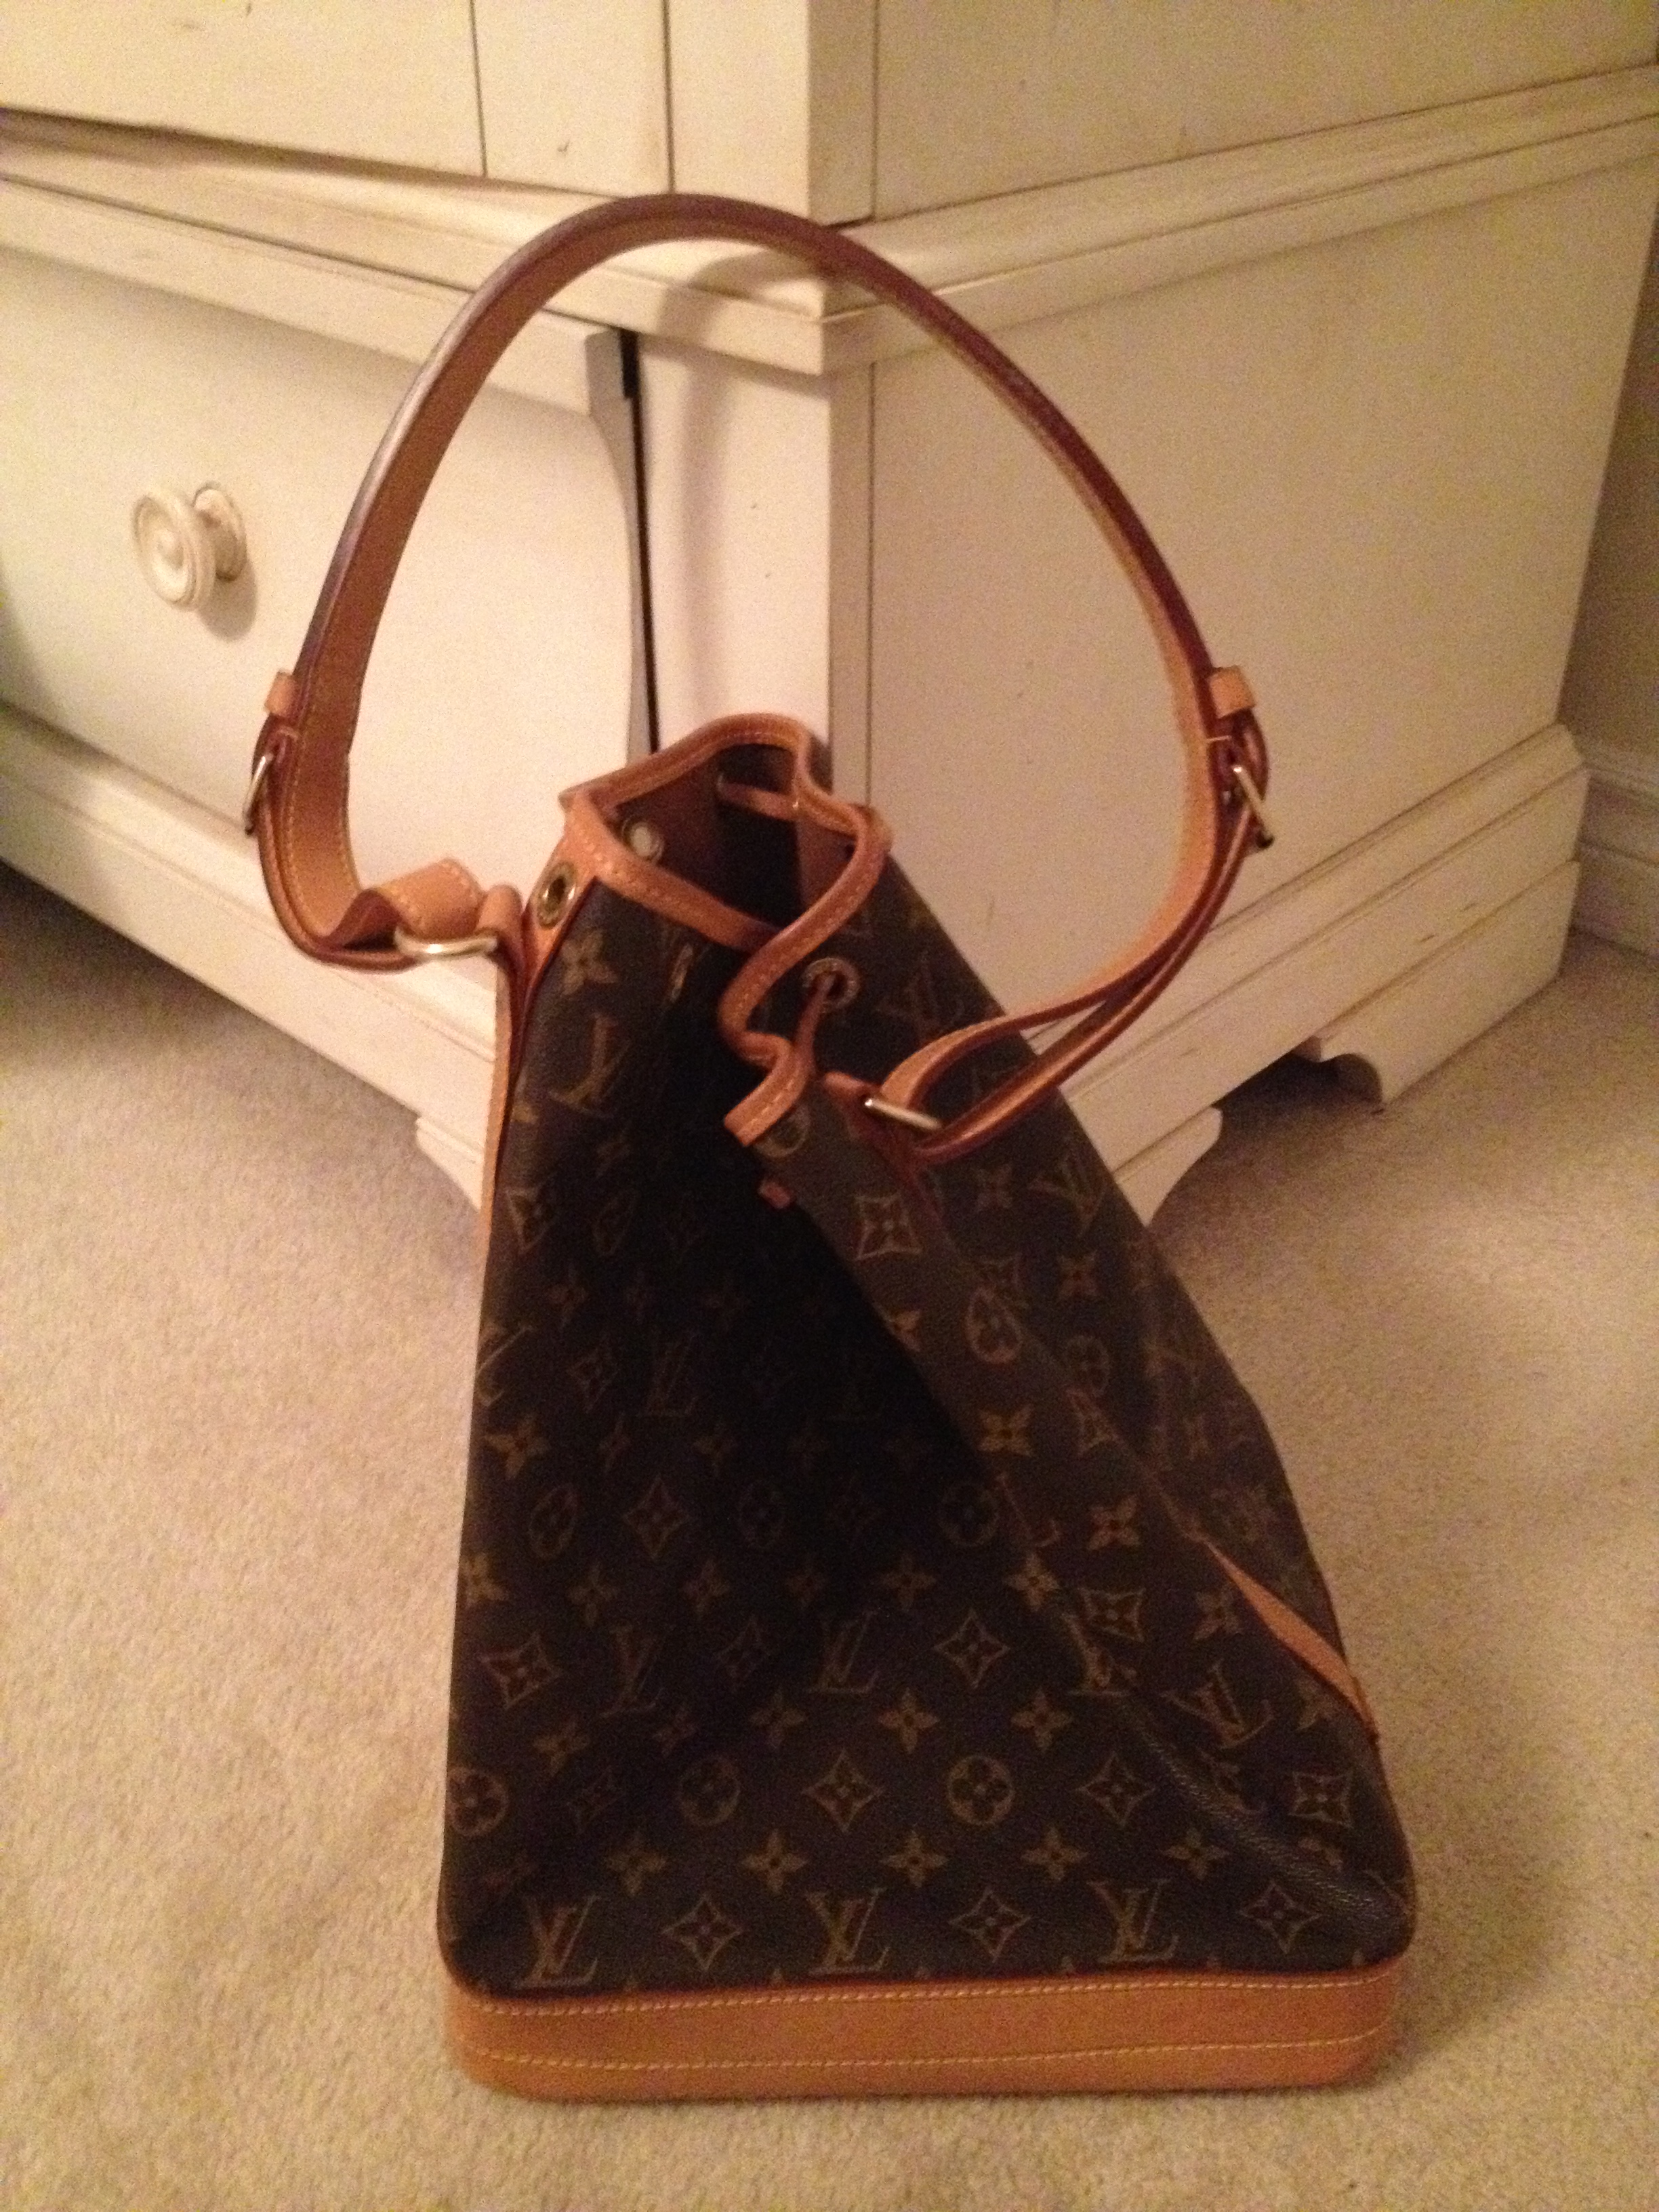 Louis Vuitton Noe bucket bag- barely worn $700.00 | COVETED FASHION